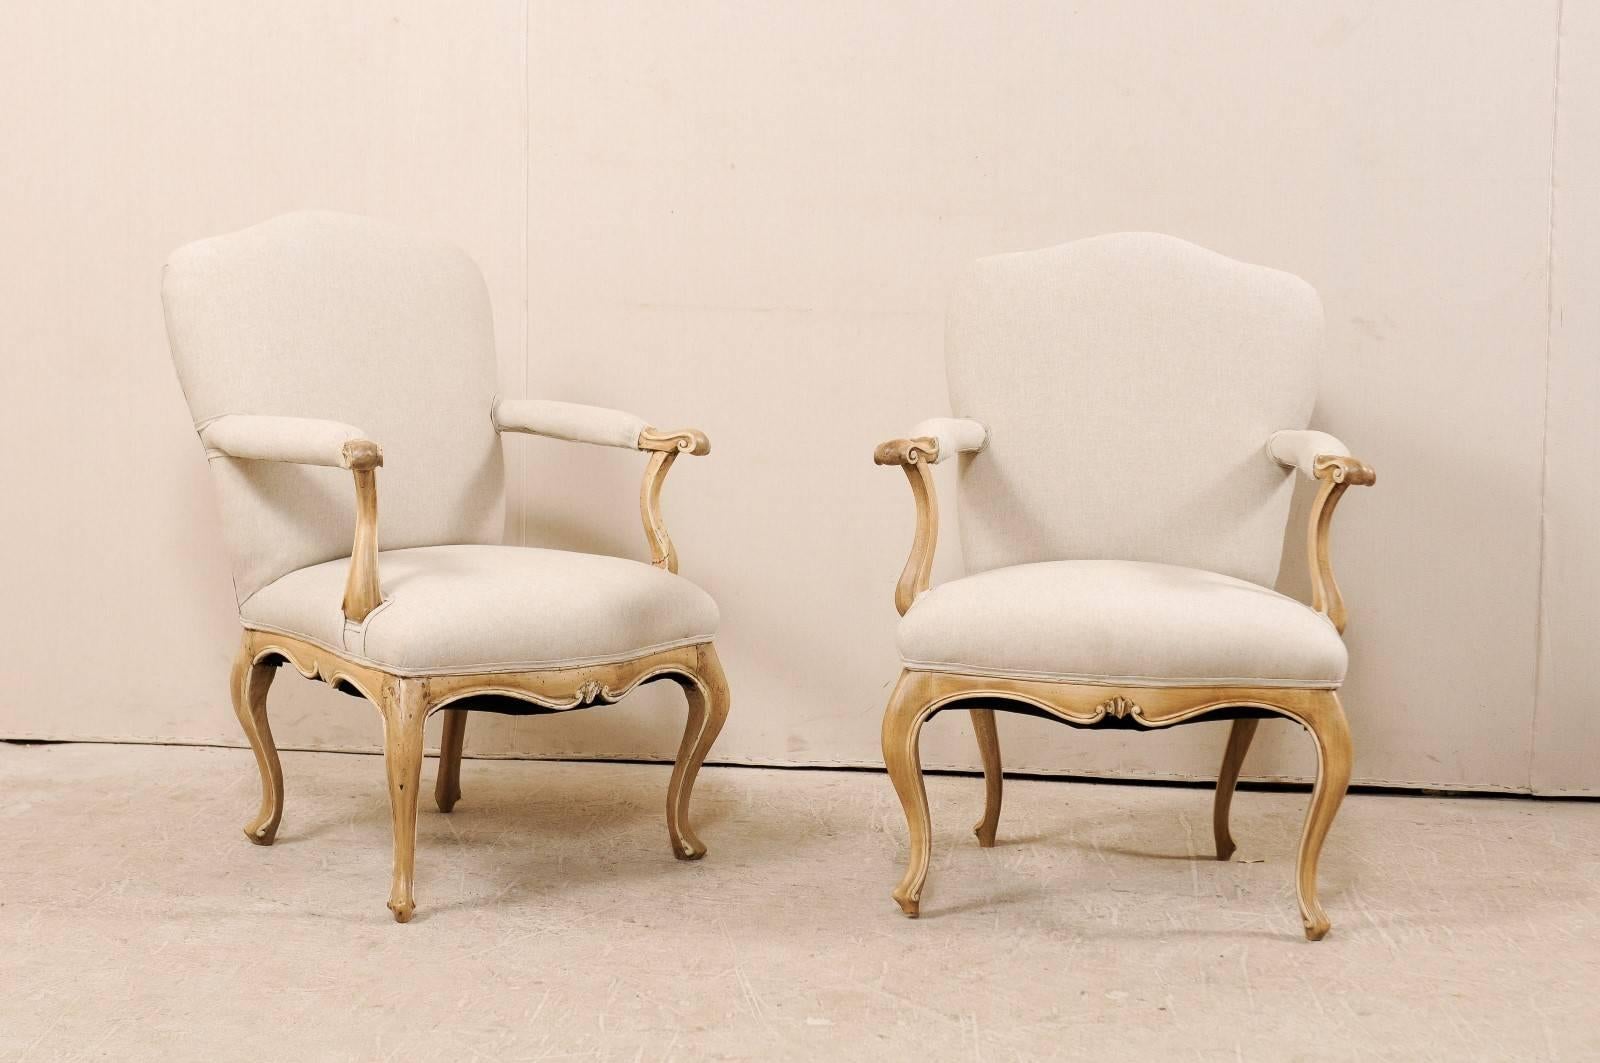 A pair of Italian 19th century carved wood and upholstered armchairs. These Italian arm chairs feature camel shaped backs, nicely carved skirt, arms and legs. There is a carved scroll motif about the knuckles which terminate into the upholstered are